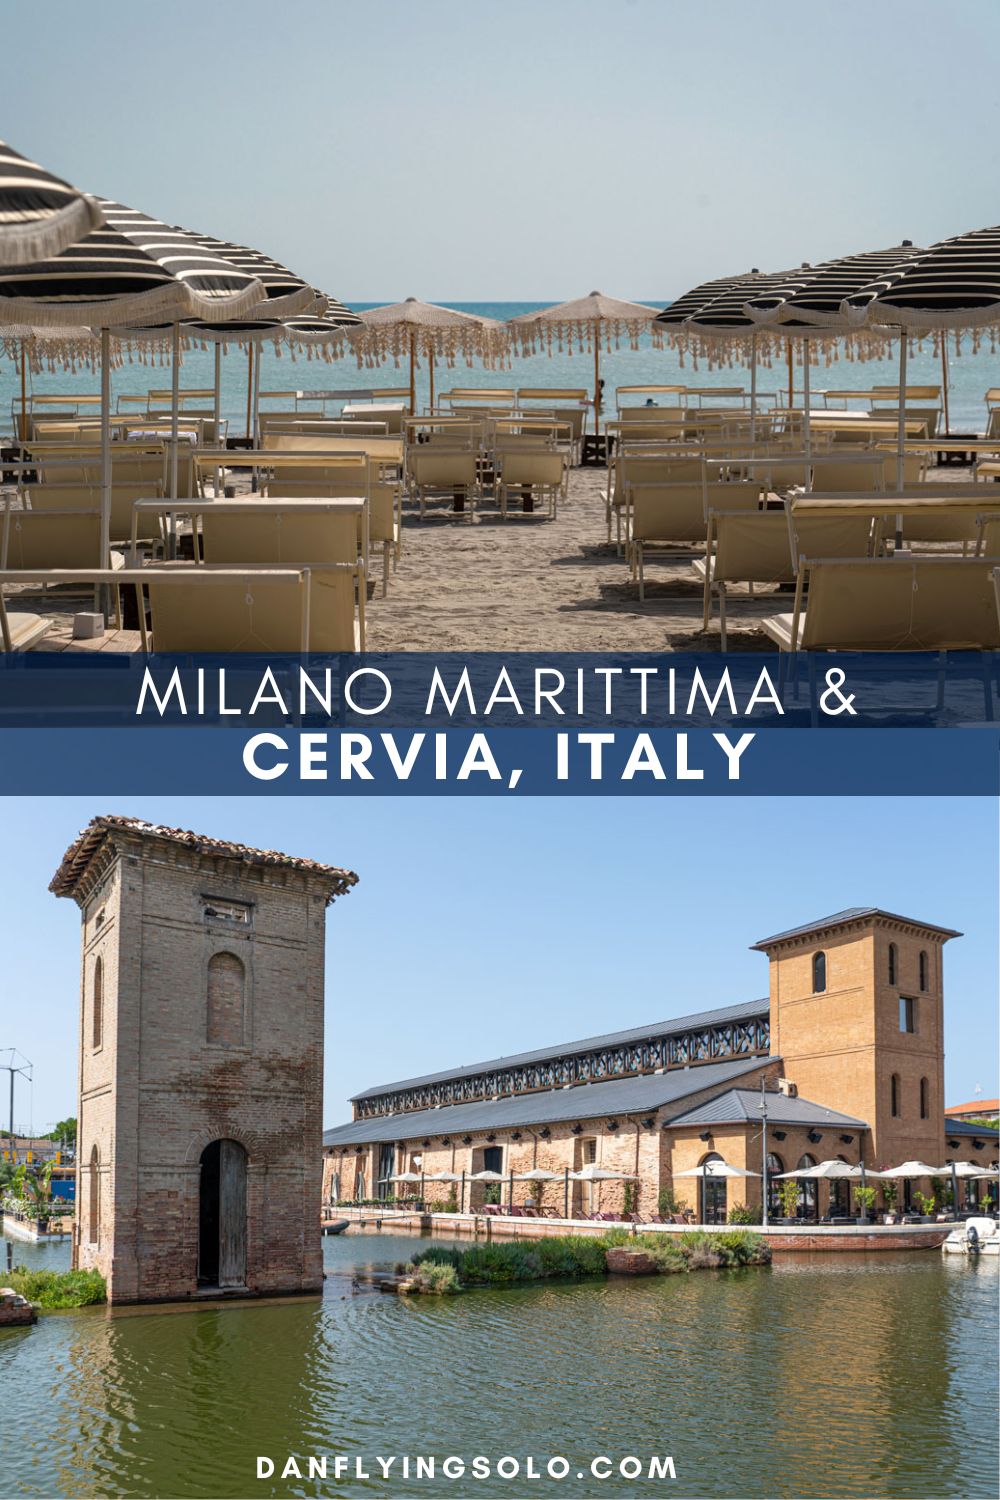 Plan a perfect visit and discover the best things to do in Cervia and Milano Marittima, Emilia Romagna's storied seaside garden town.